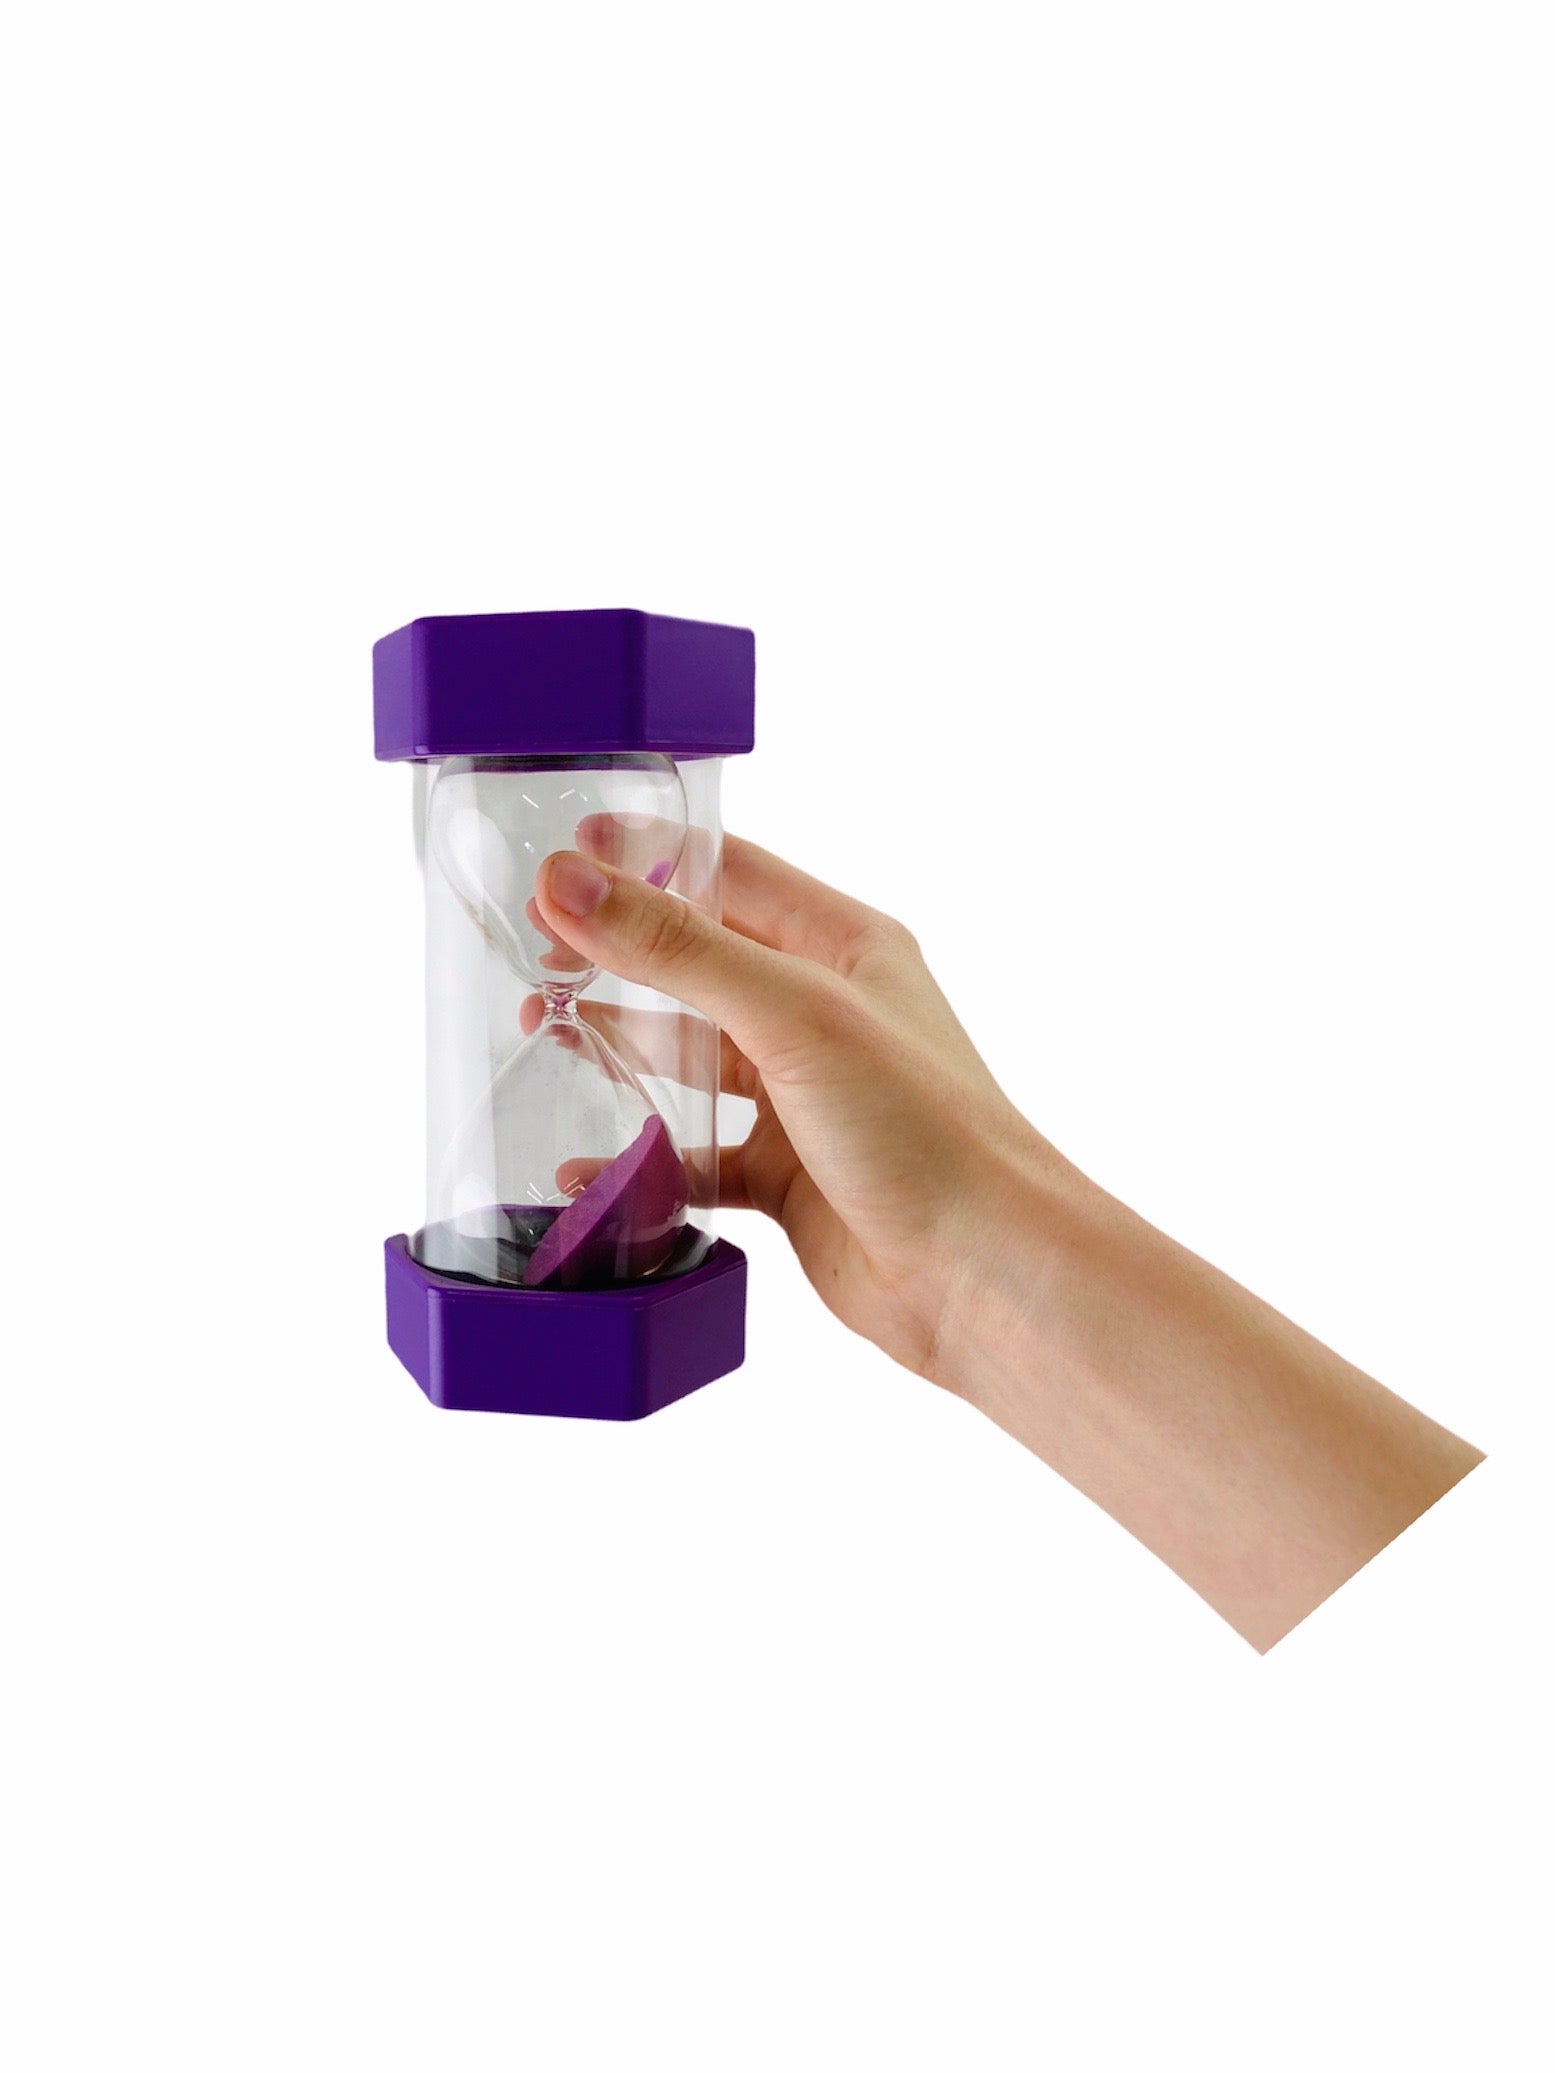 Hand holding Giant Purple 15 minute Sand Timer